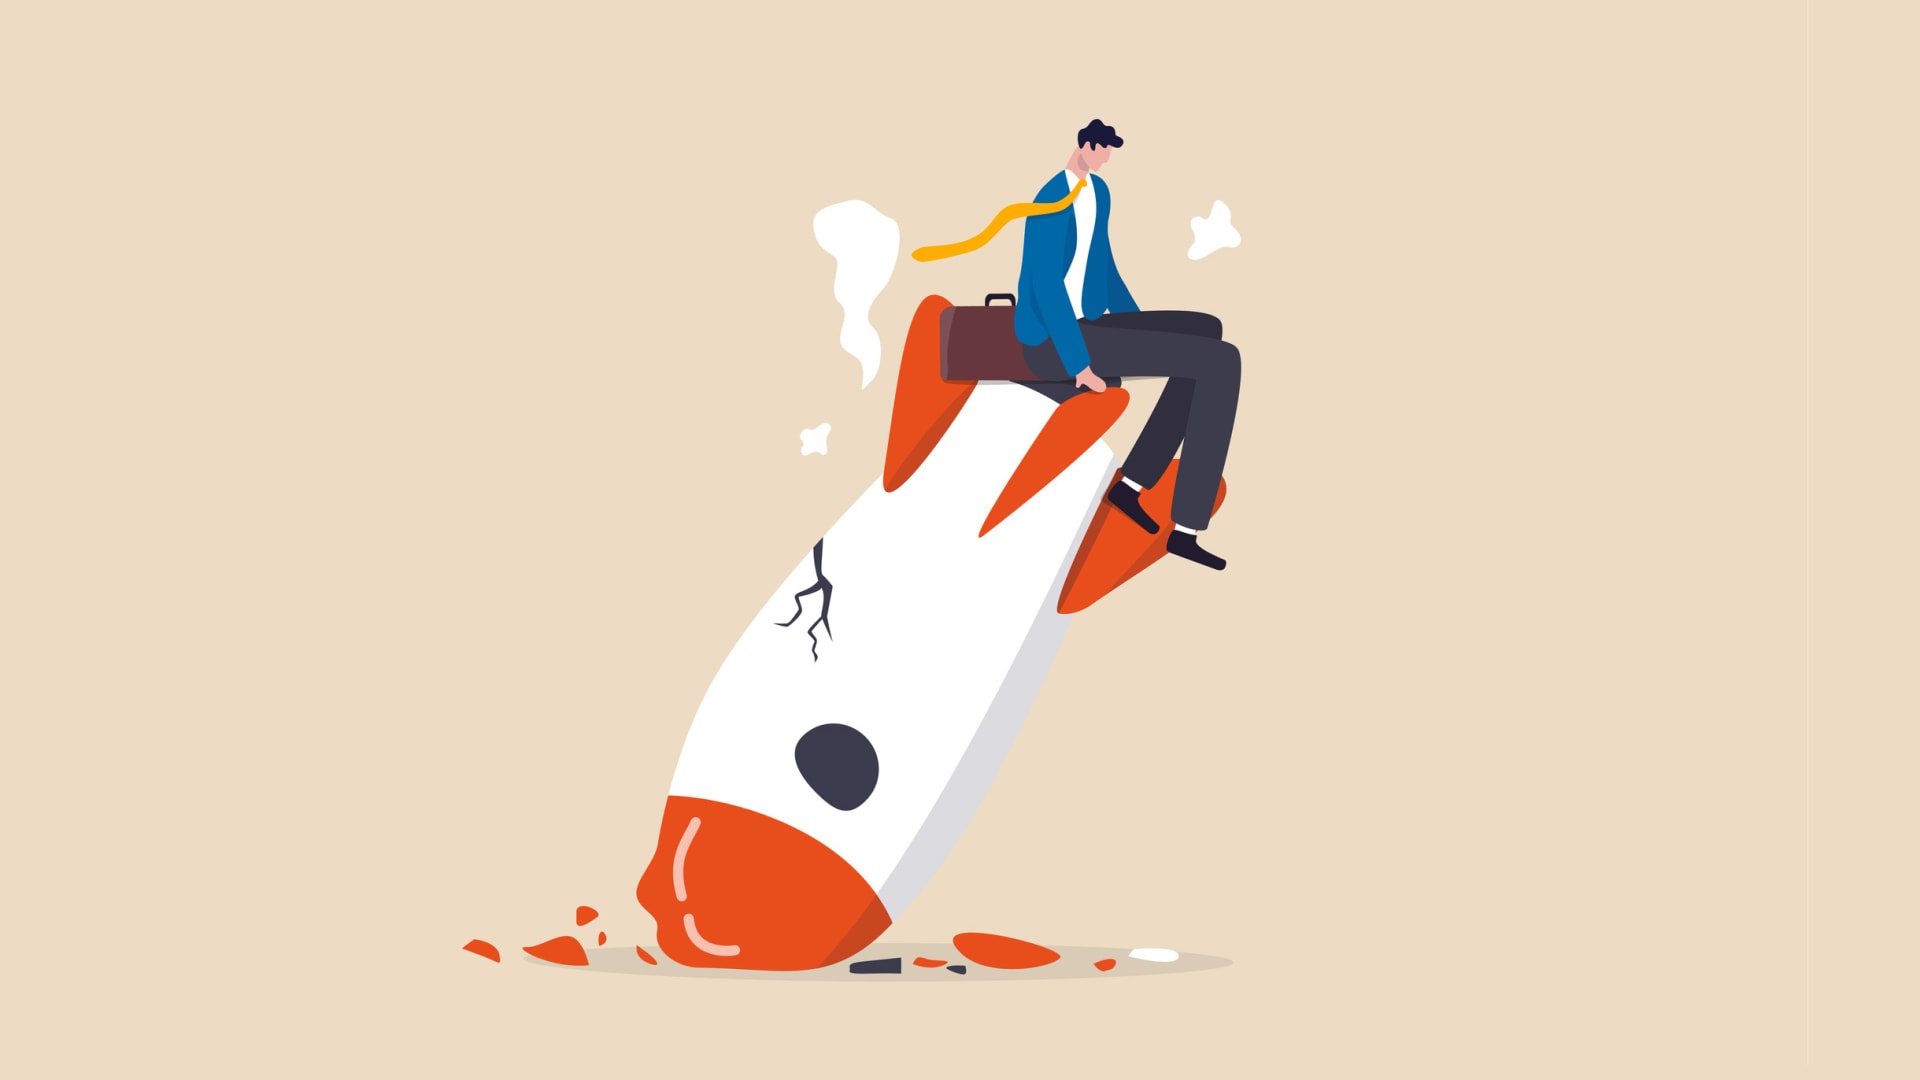 The Biggest Misconception on Why Startups Fail